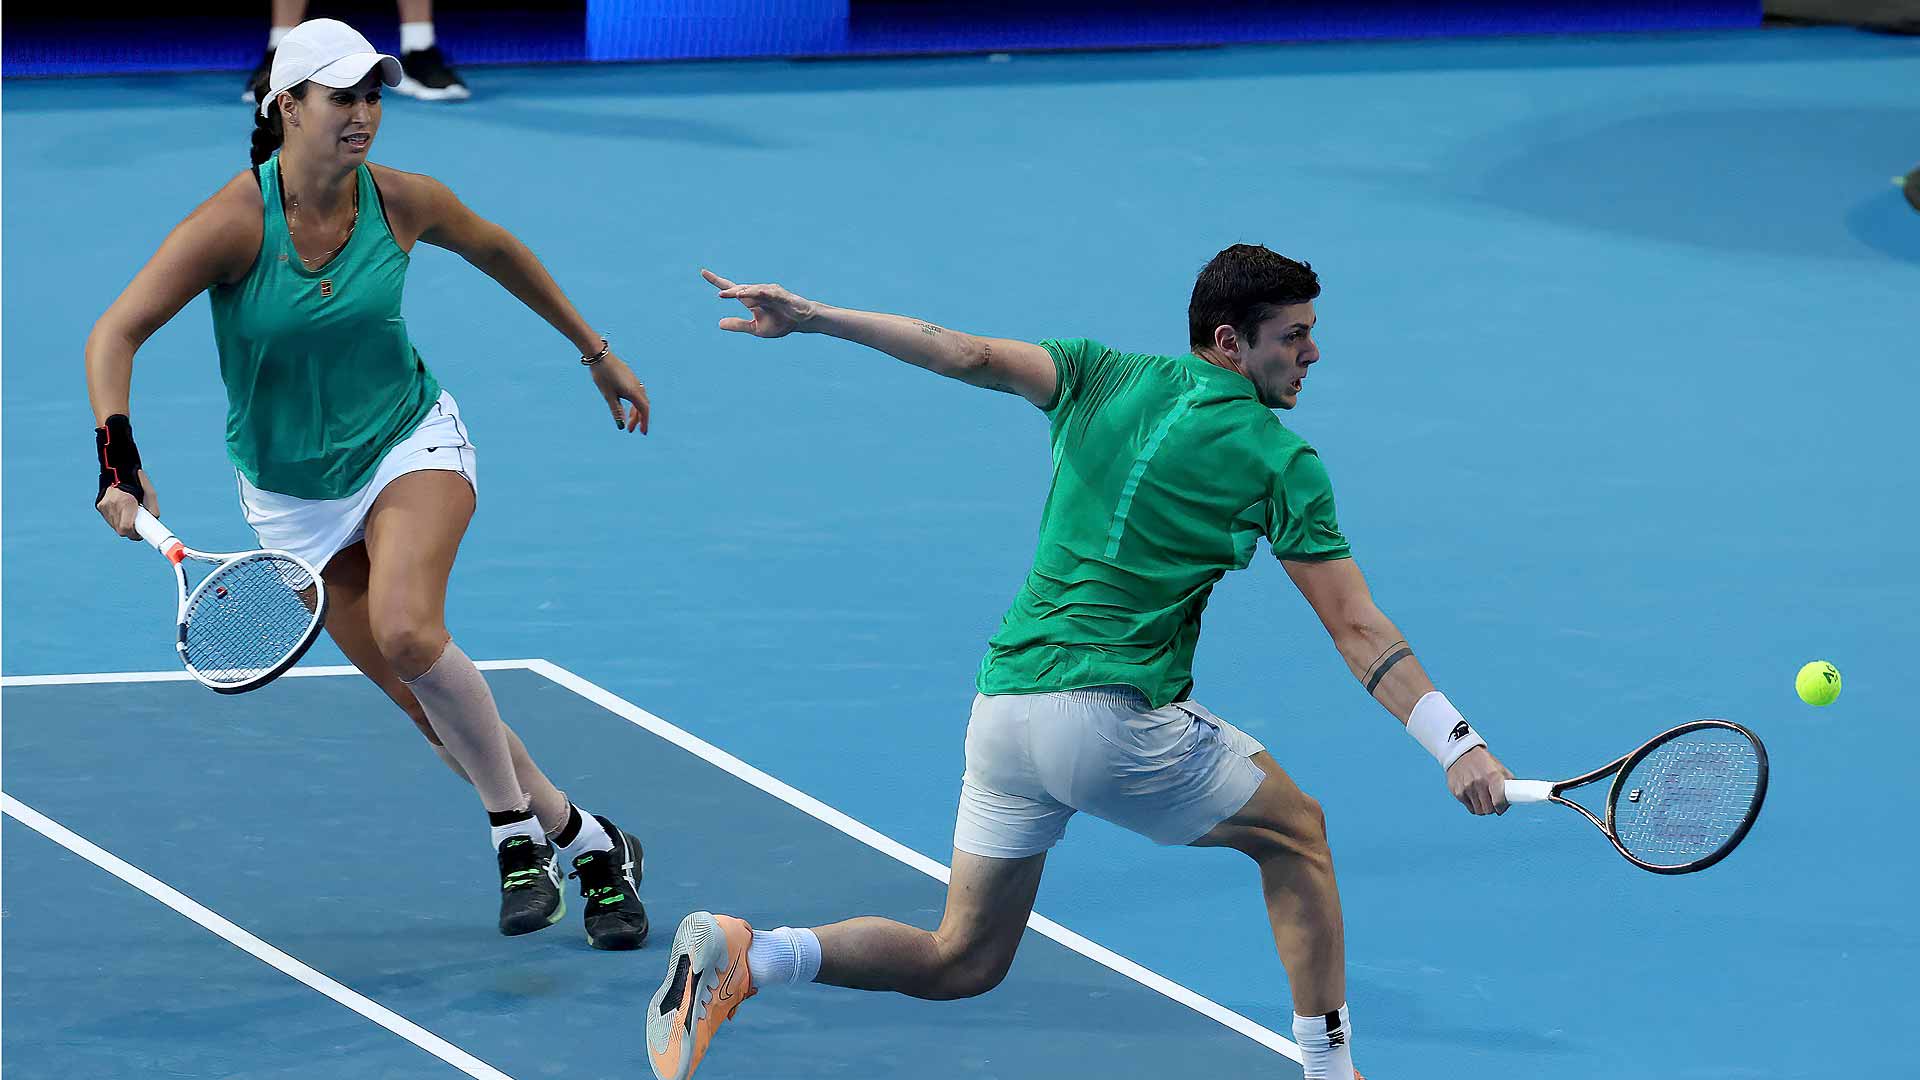 Isabella Shinikova and Alexandar Lazarov seal a thrilling mixed-doubles victory on Sunday in Perth.